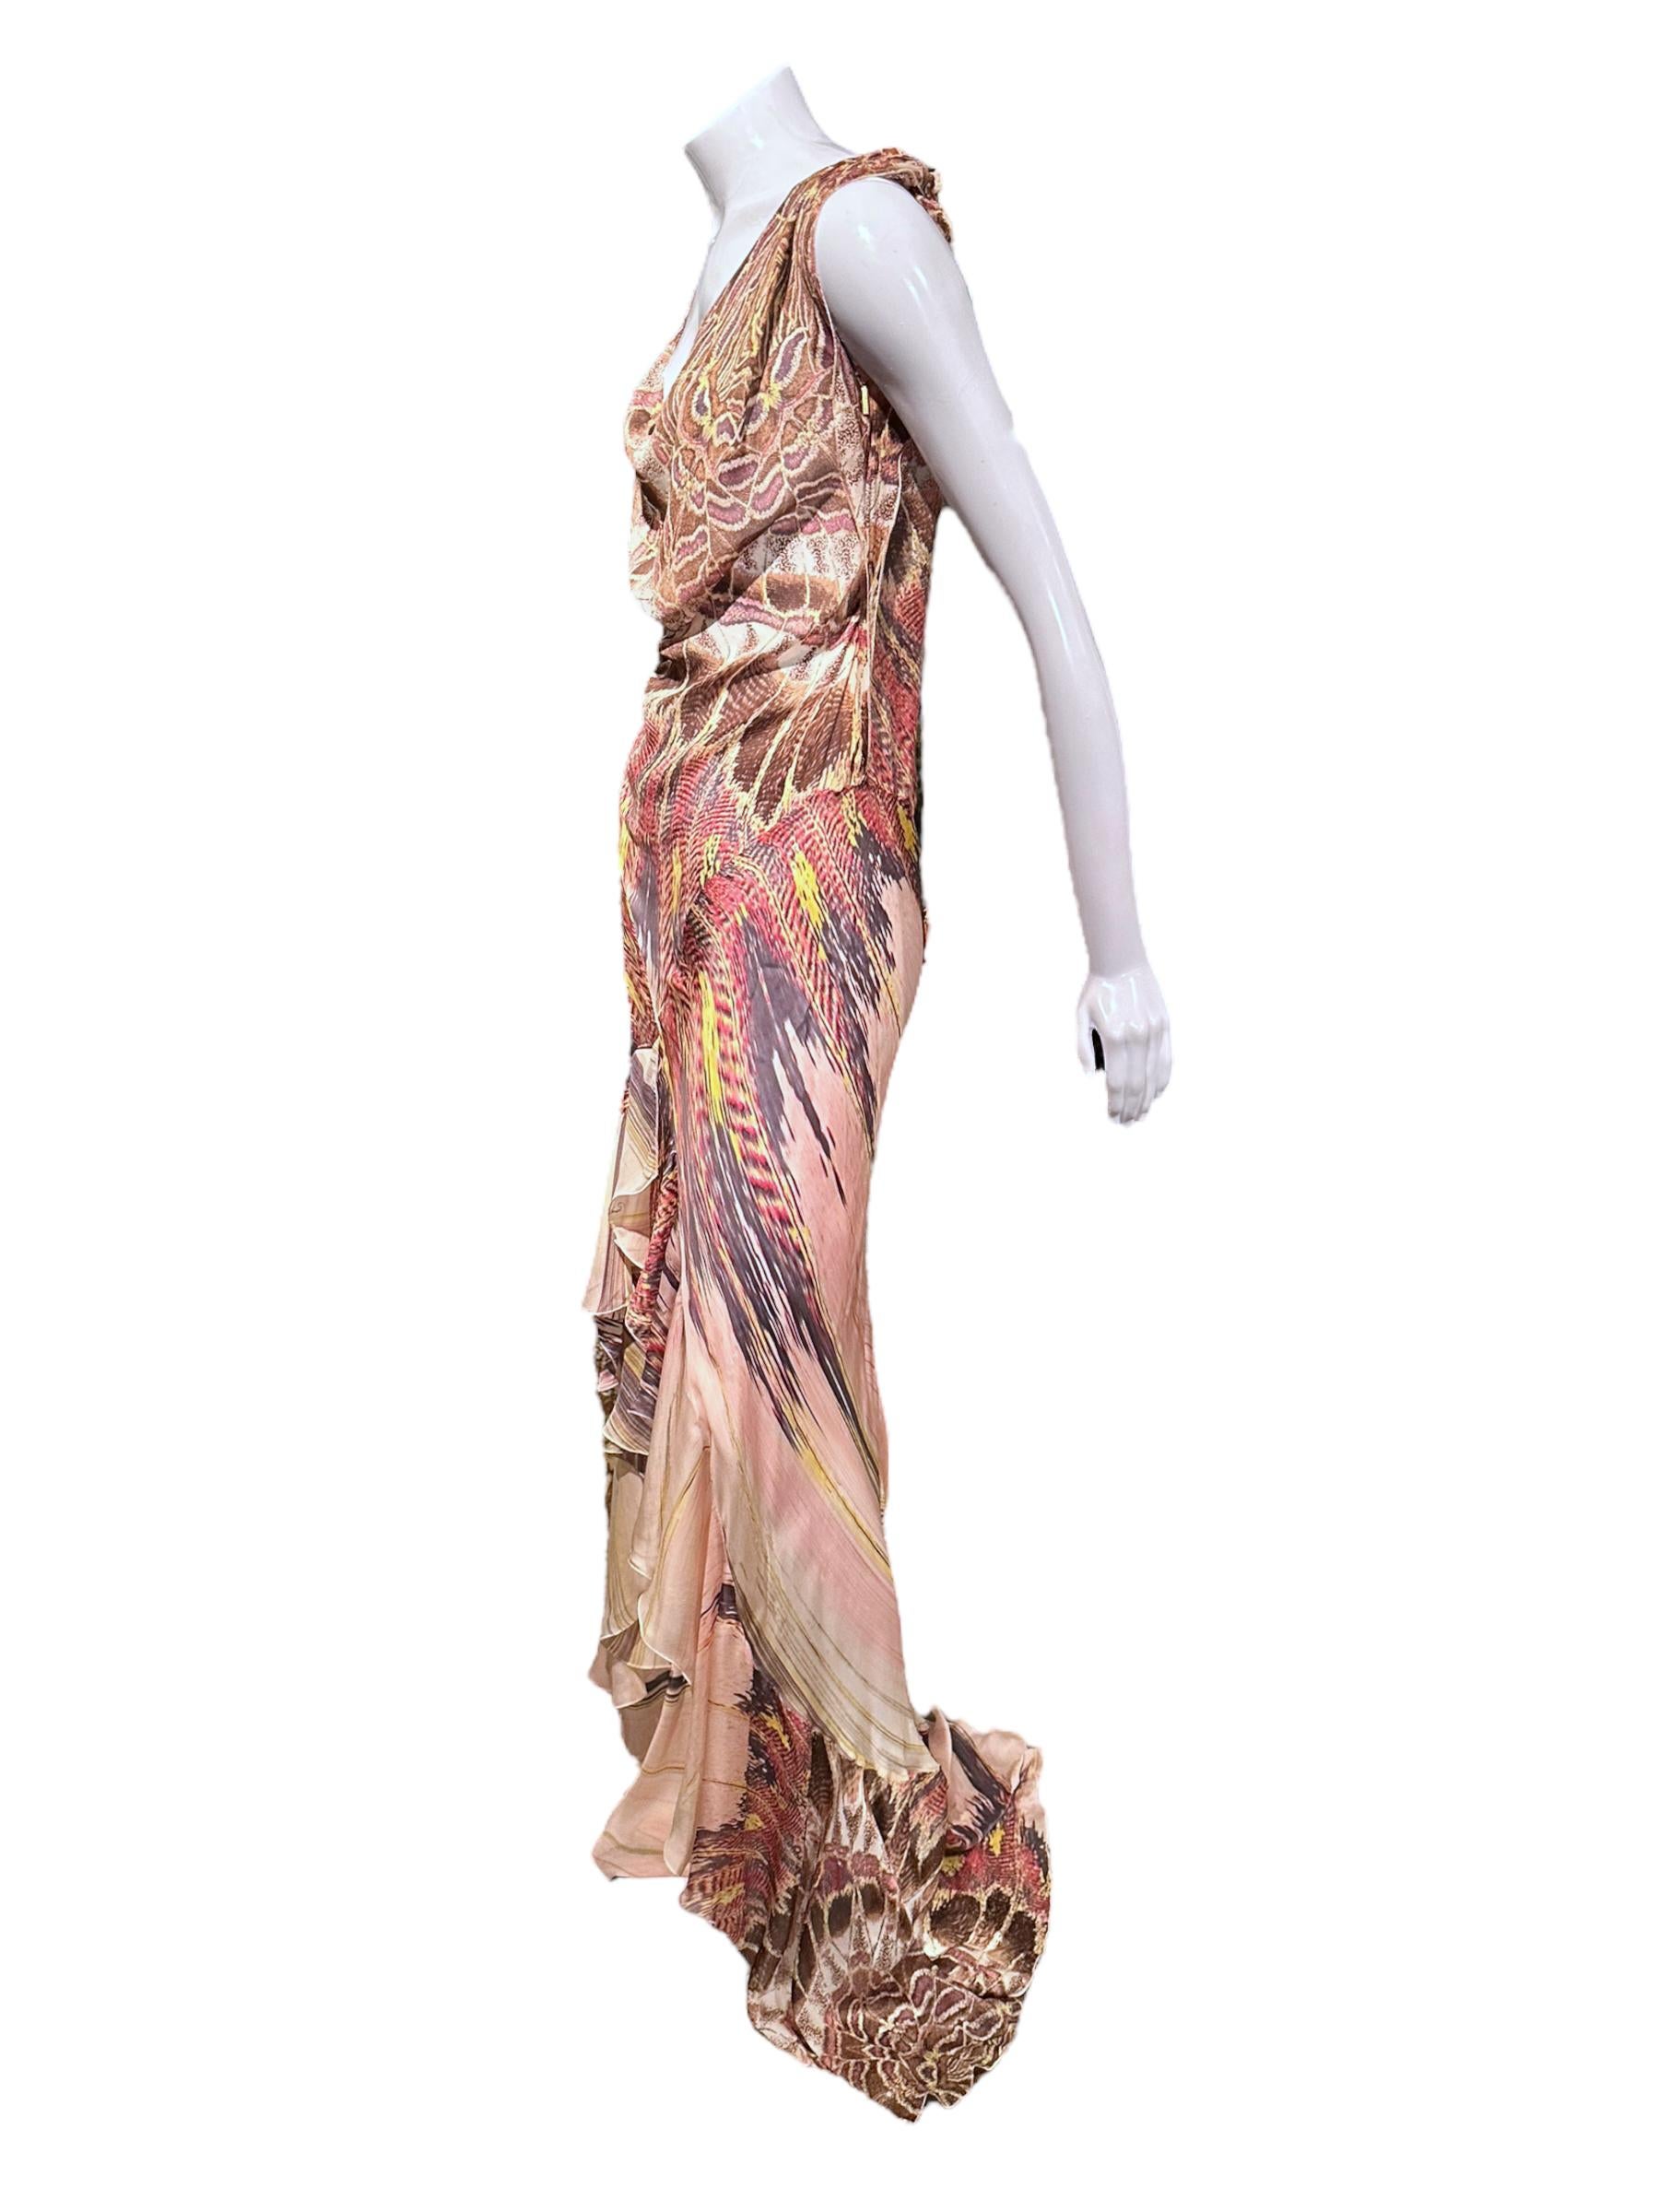 Roberto Cavalli Iconic Feather Print Ss 2004 Cowl Neck Flowy Silk Slip Gown In Excellent Condition For Sale In São Paulo, SP